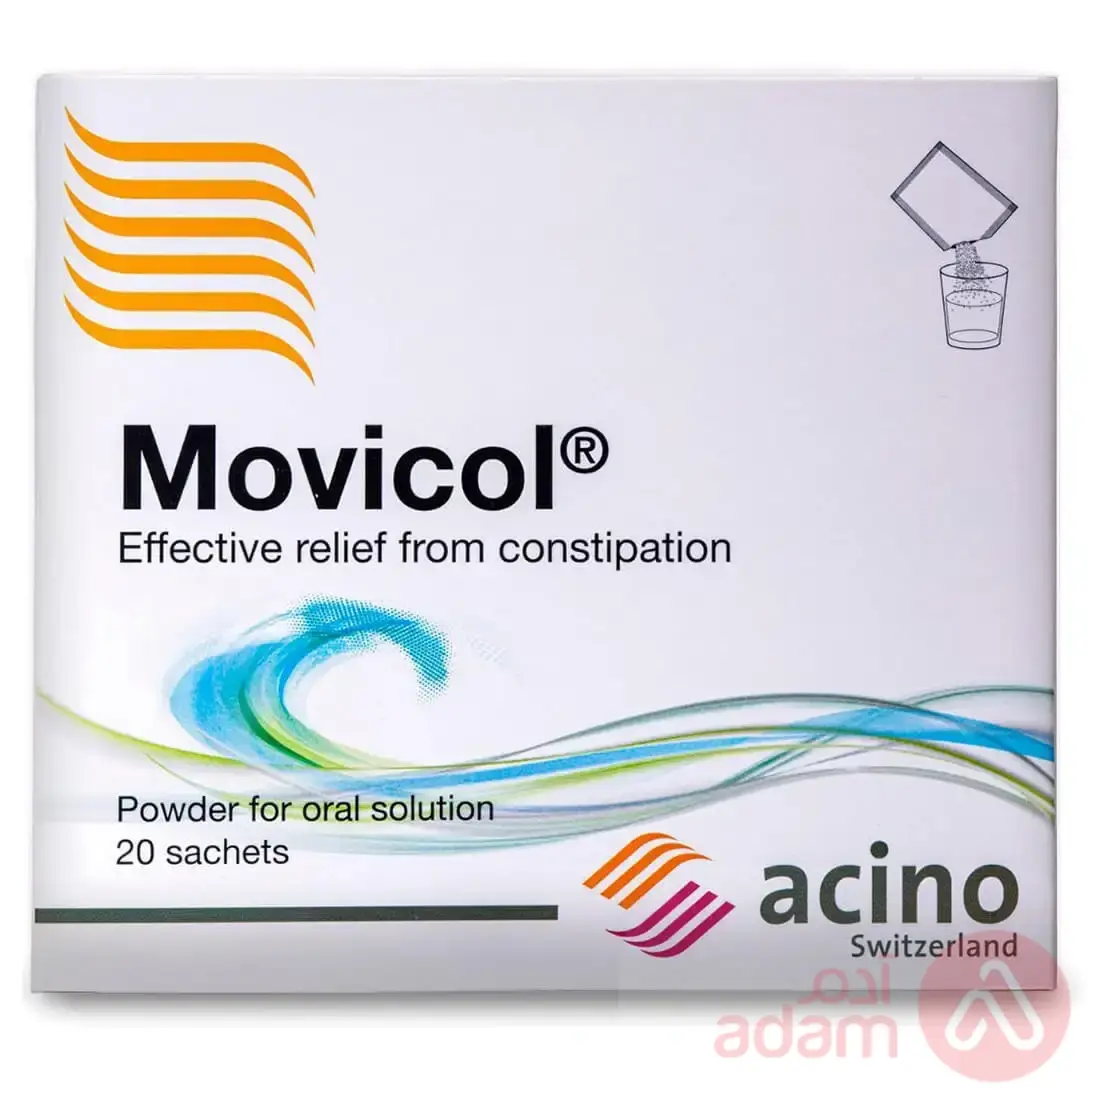 Movicol Natural Fibers For Constipation | 20 Sachet